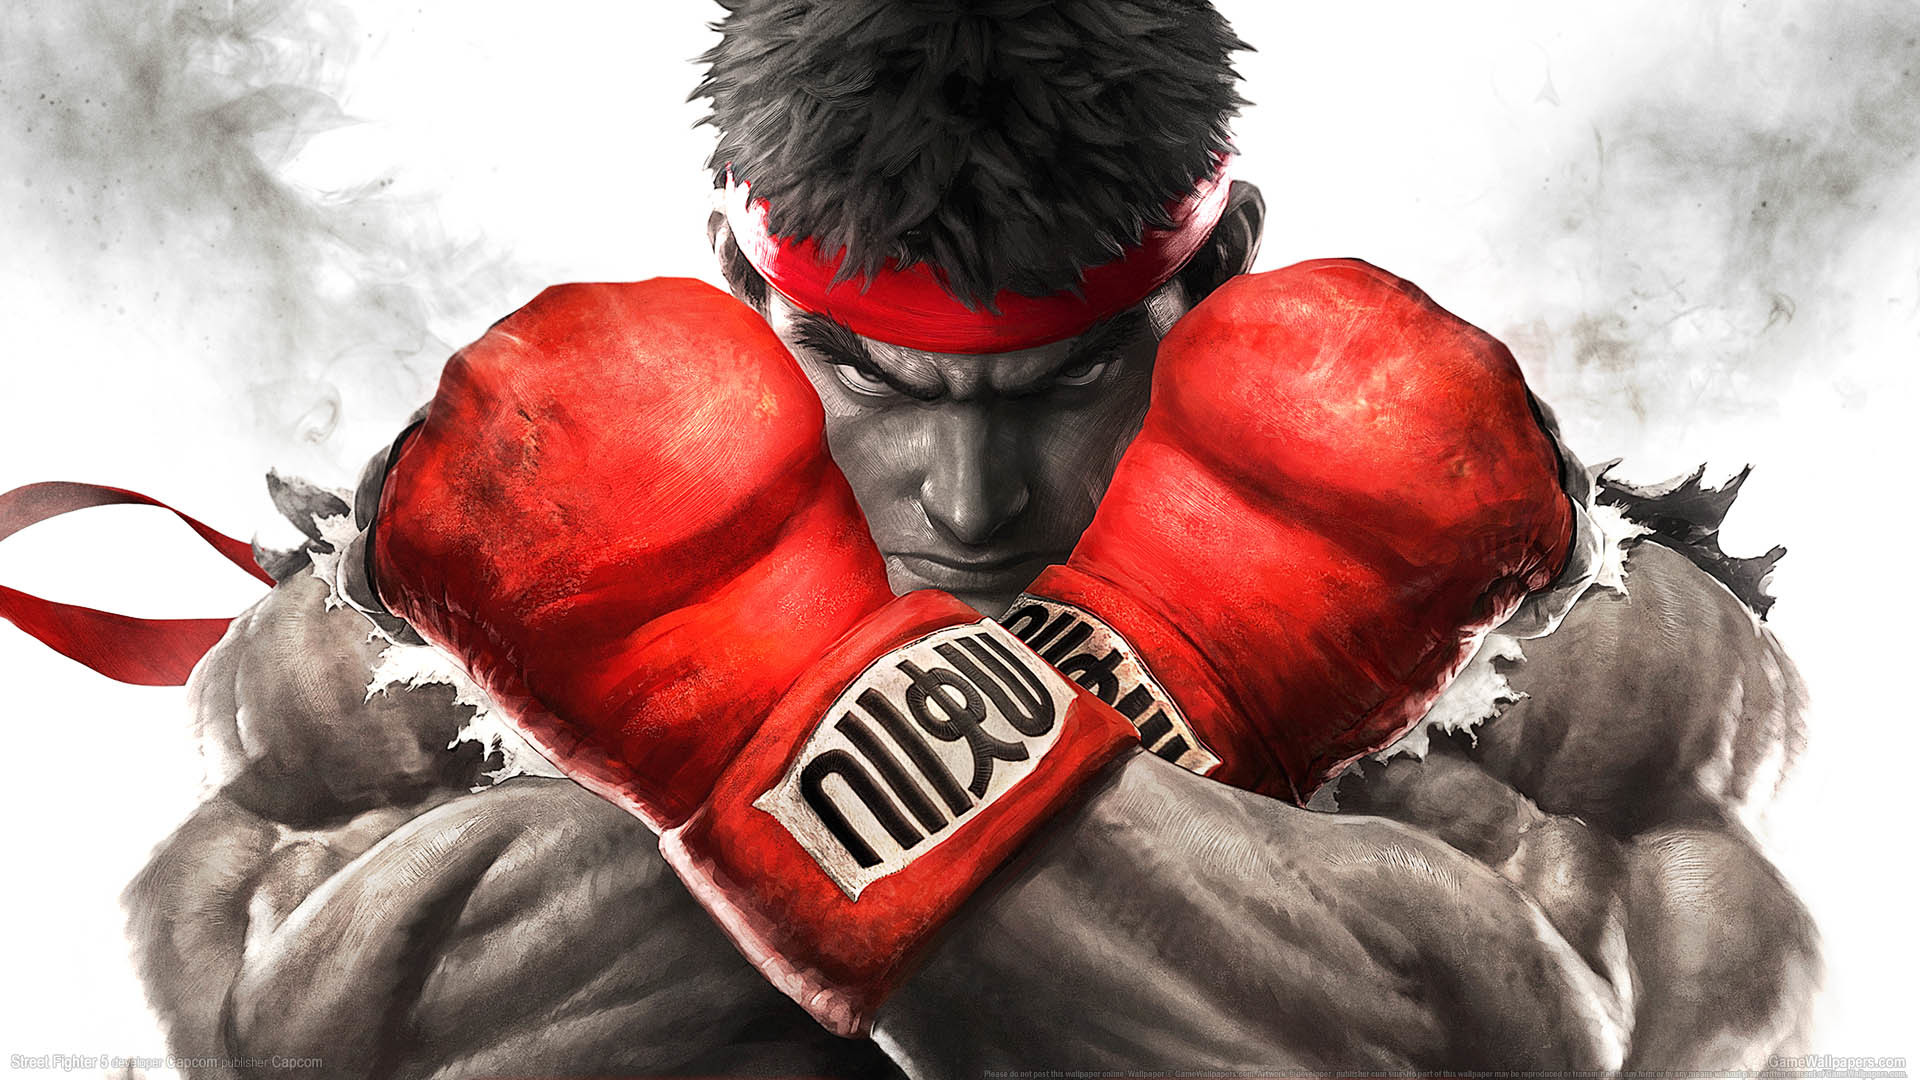 1920x1080 Street Fighter 5 wallpaper or background Street Fighter 5 wallpaper or  background 01